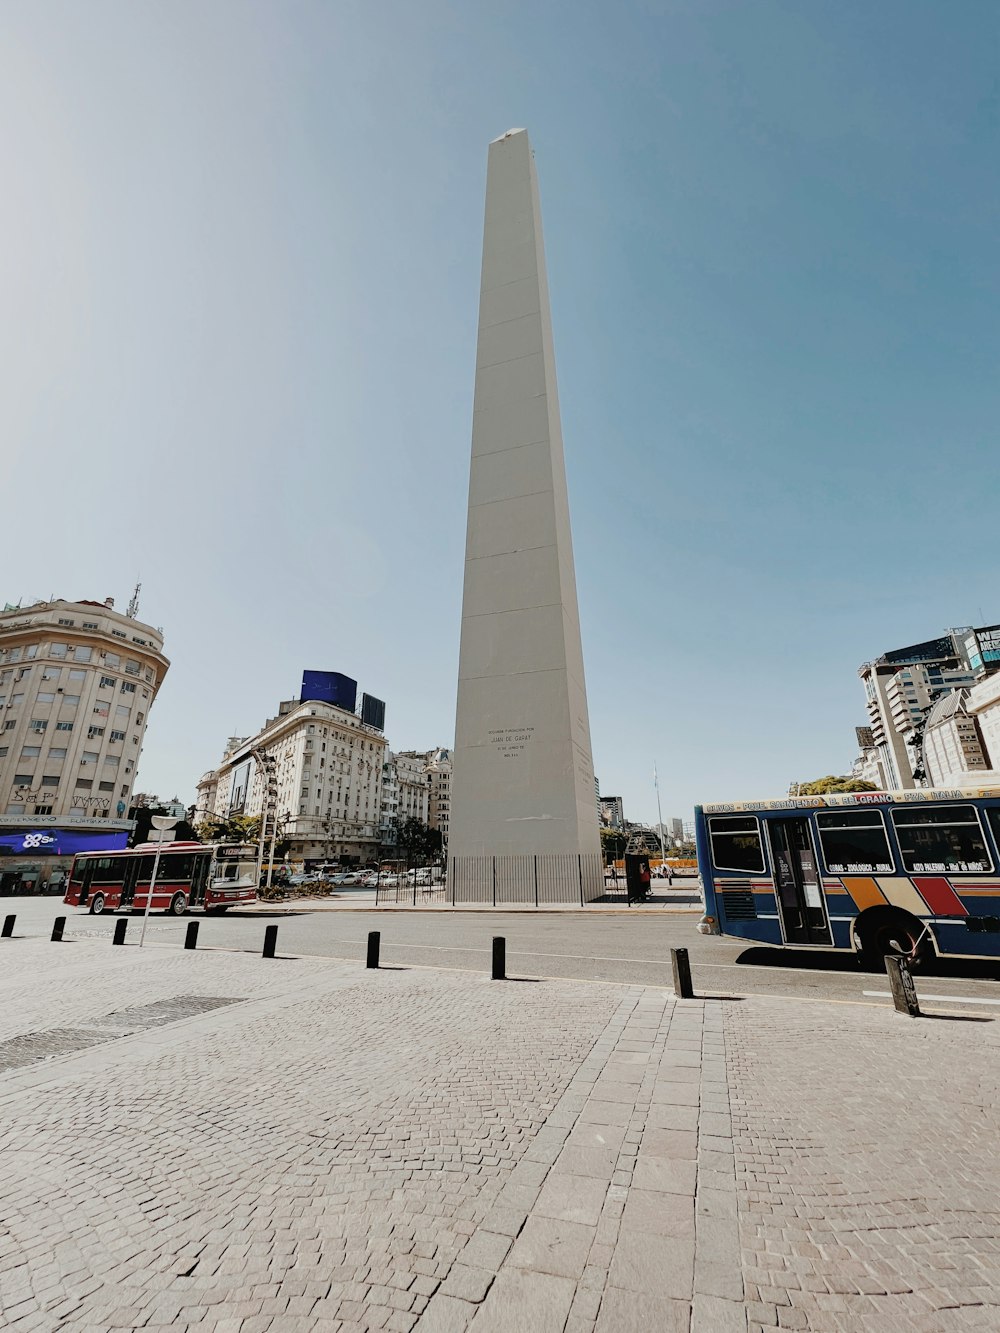 a very tall obelisk in the middle of a city